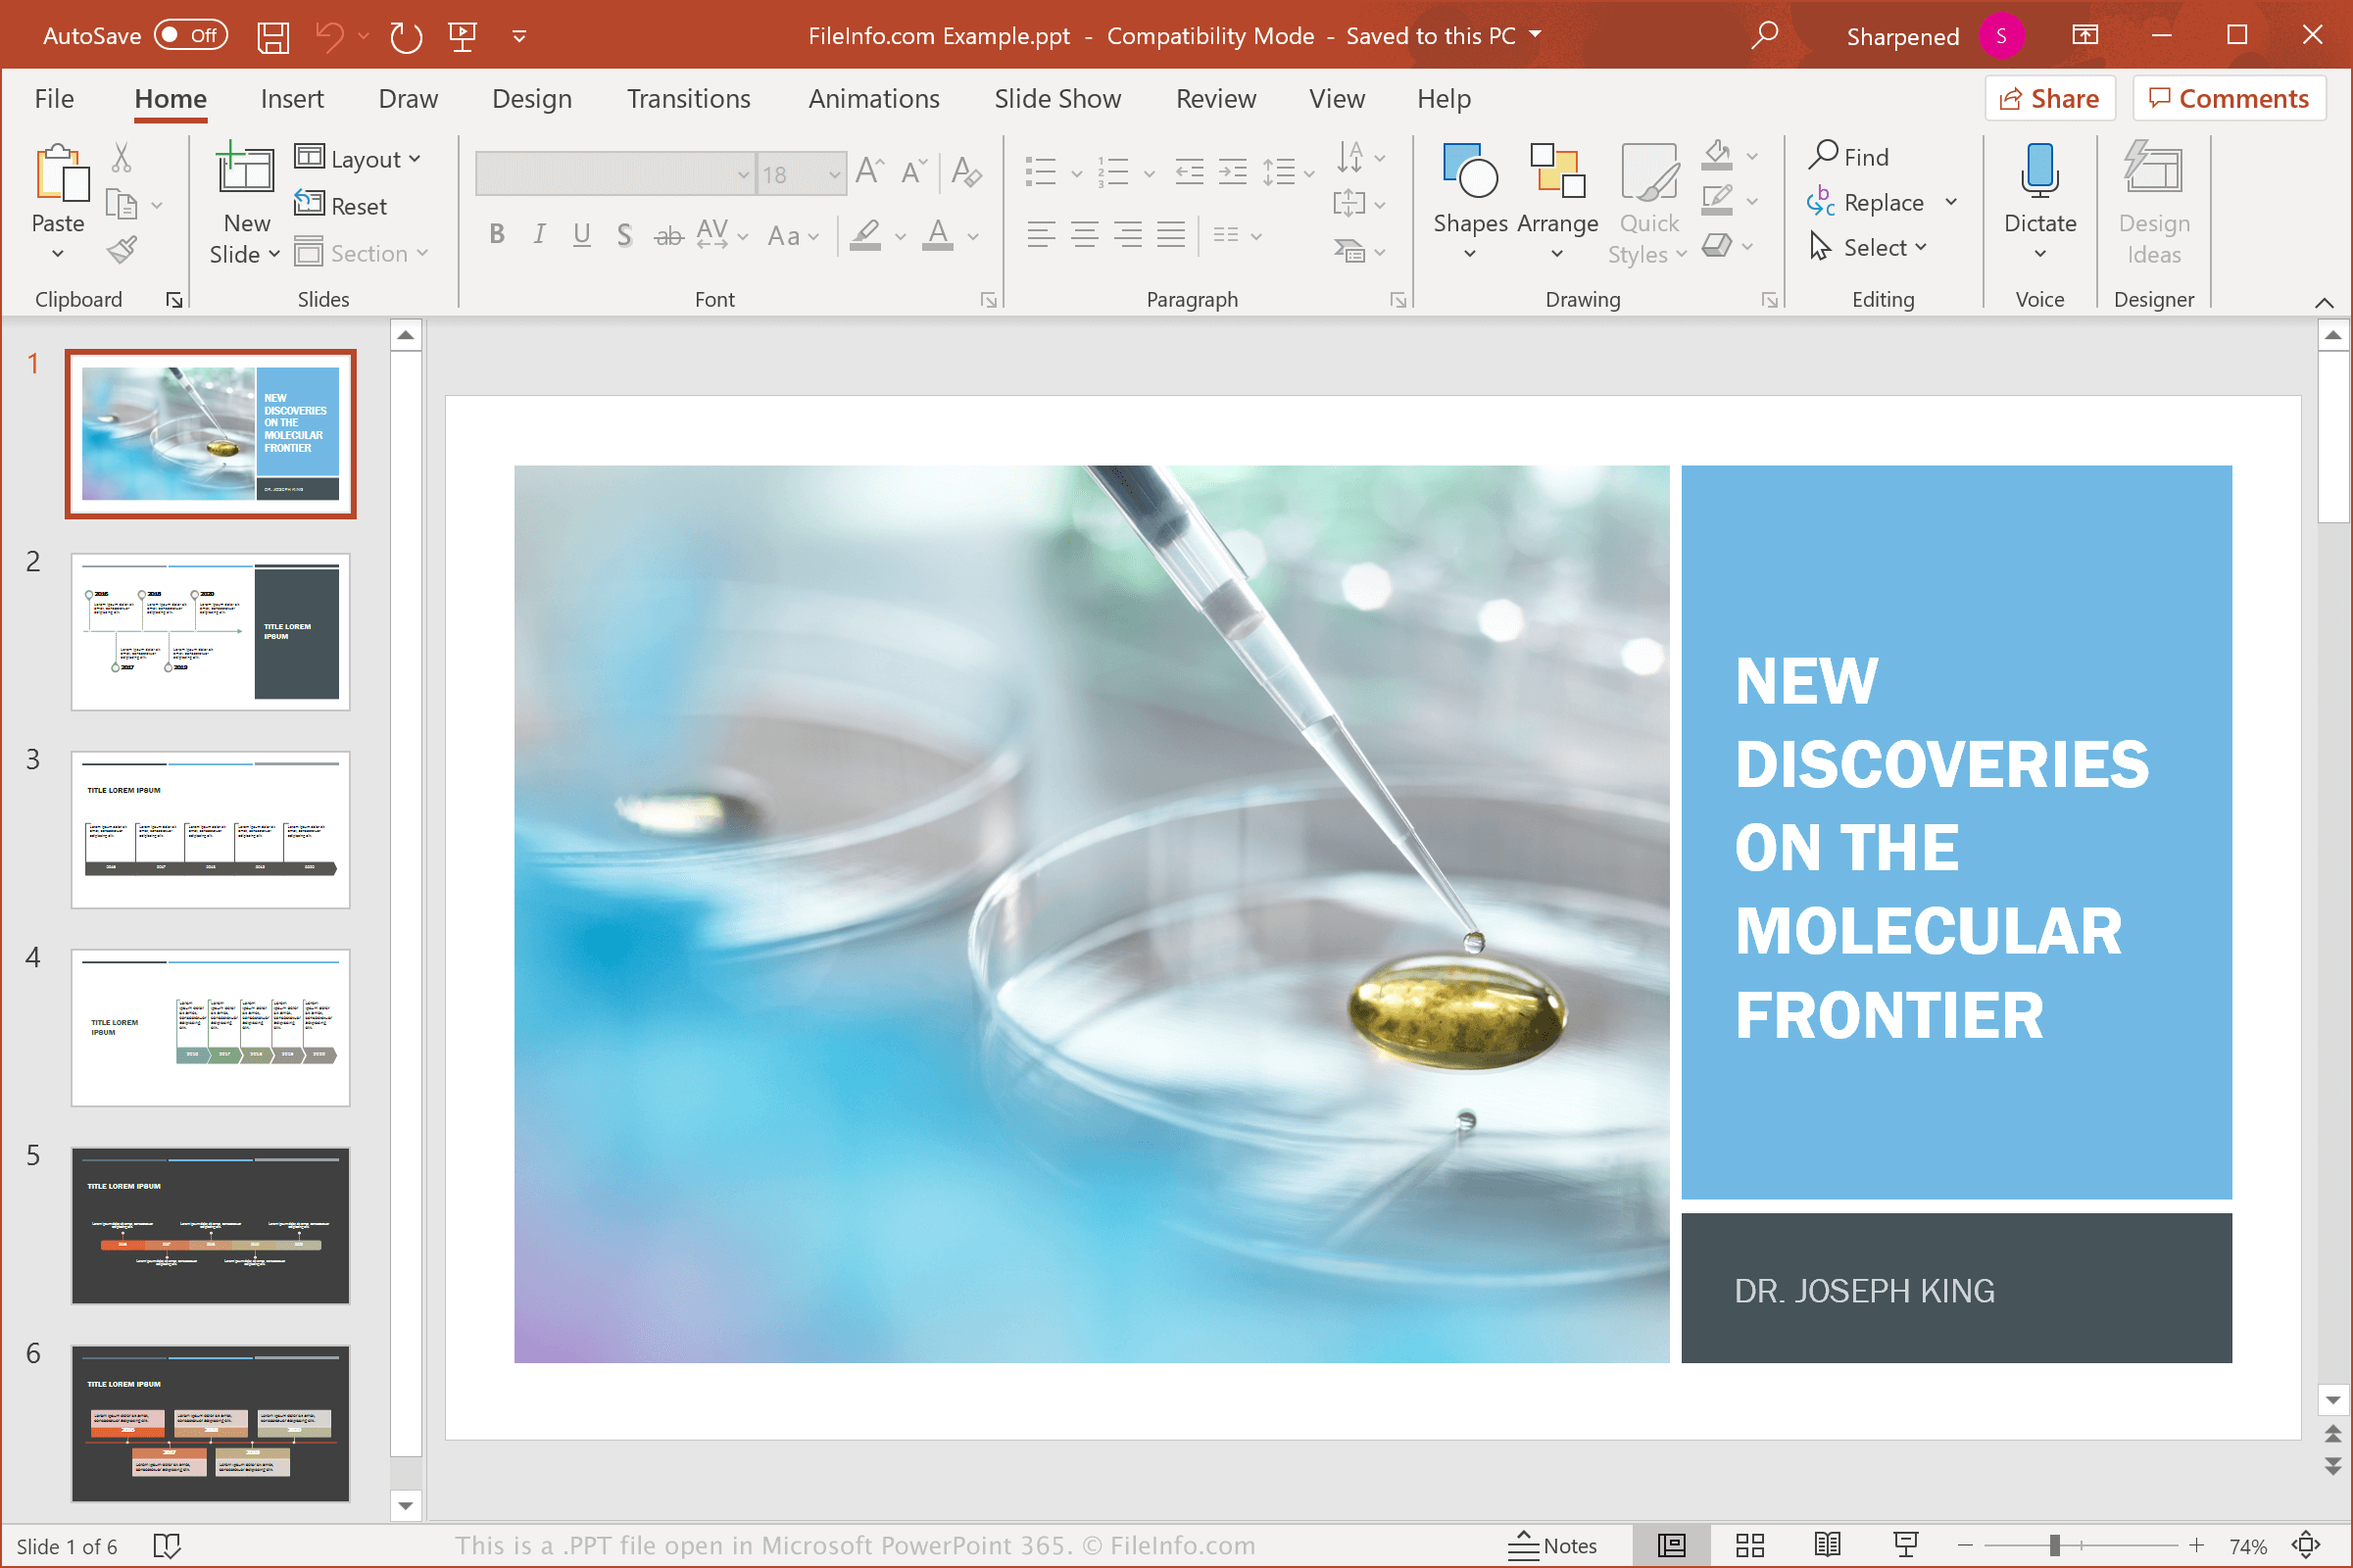 jpg is the extension of powerpoint presentation file